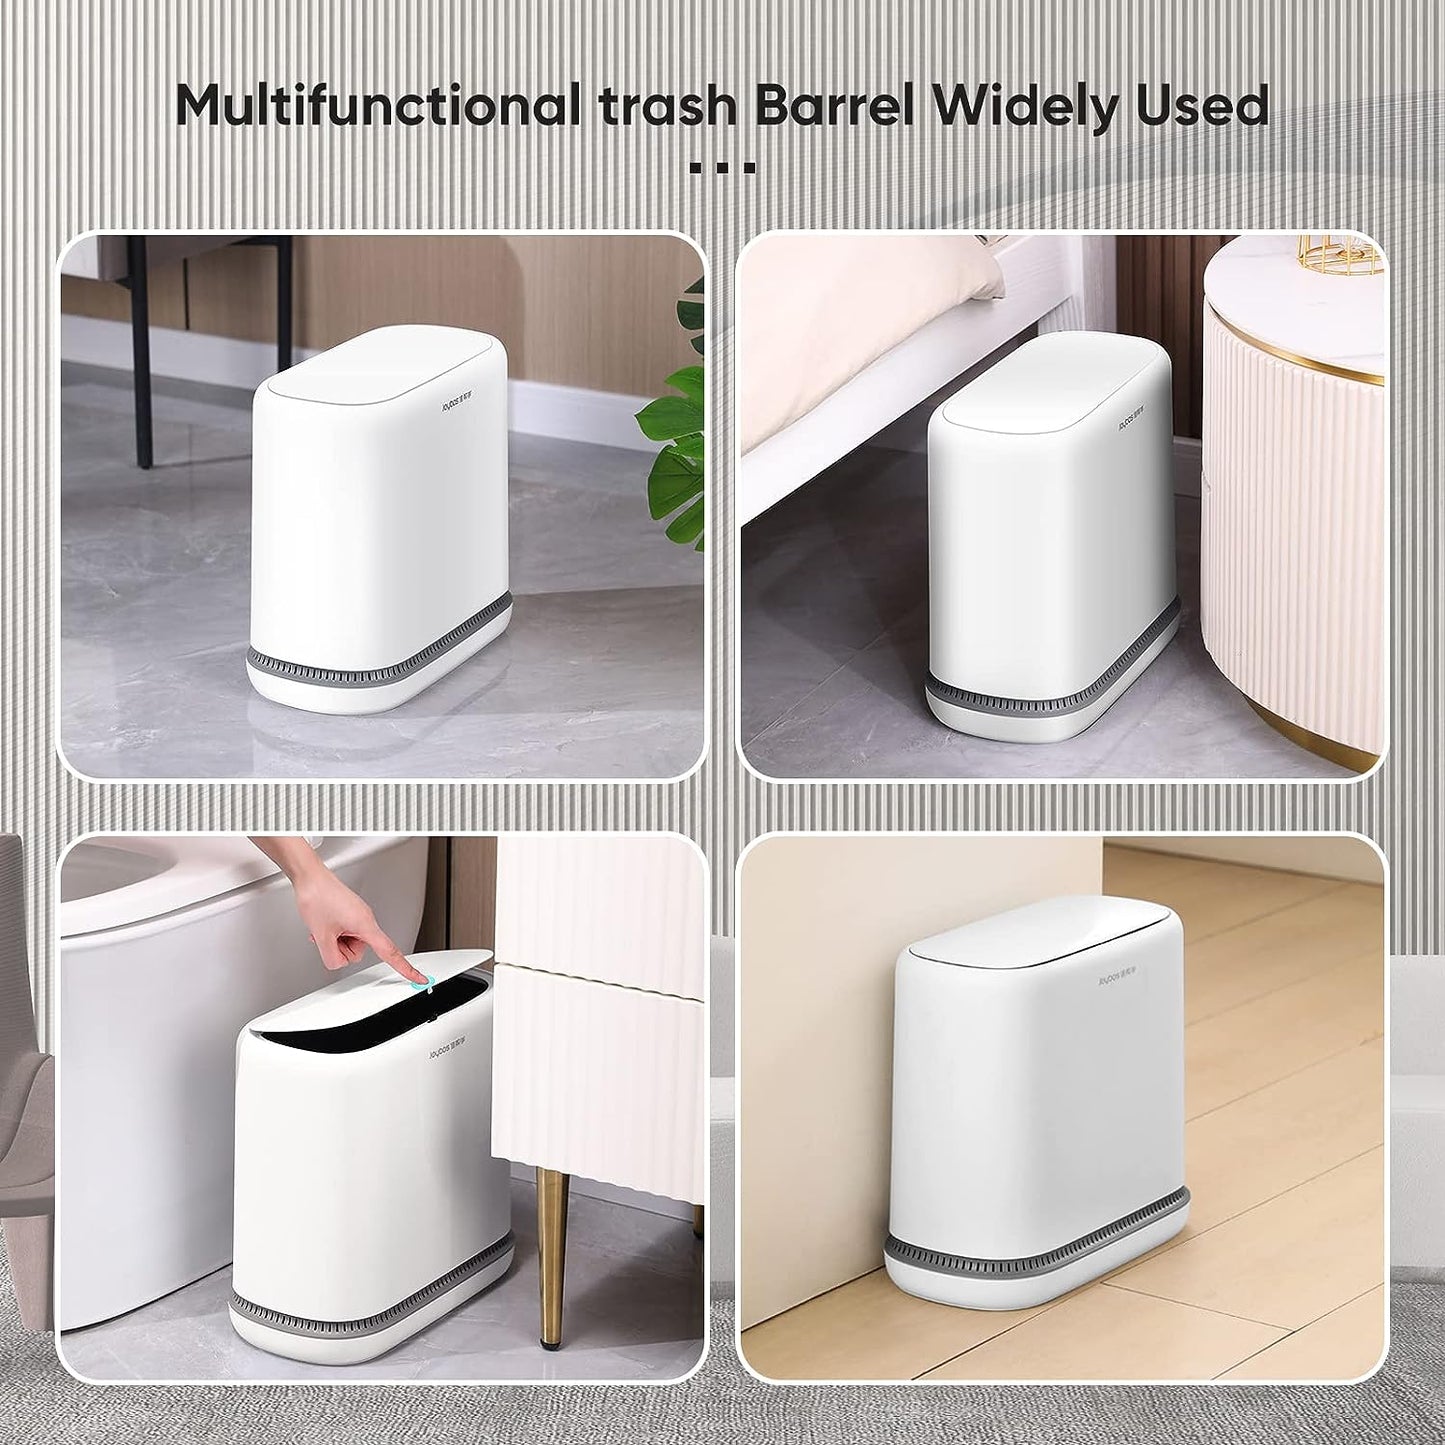 Adsorption Bathroom Trash Can with Lids,Kitchen Wastebasket with Press Type Lid,15L Dogproof Slim Plastic Narrow Garbage Can,4 Gallon Garbage Bin for Home,Office and Narrow Place